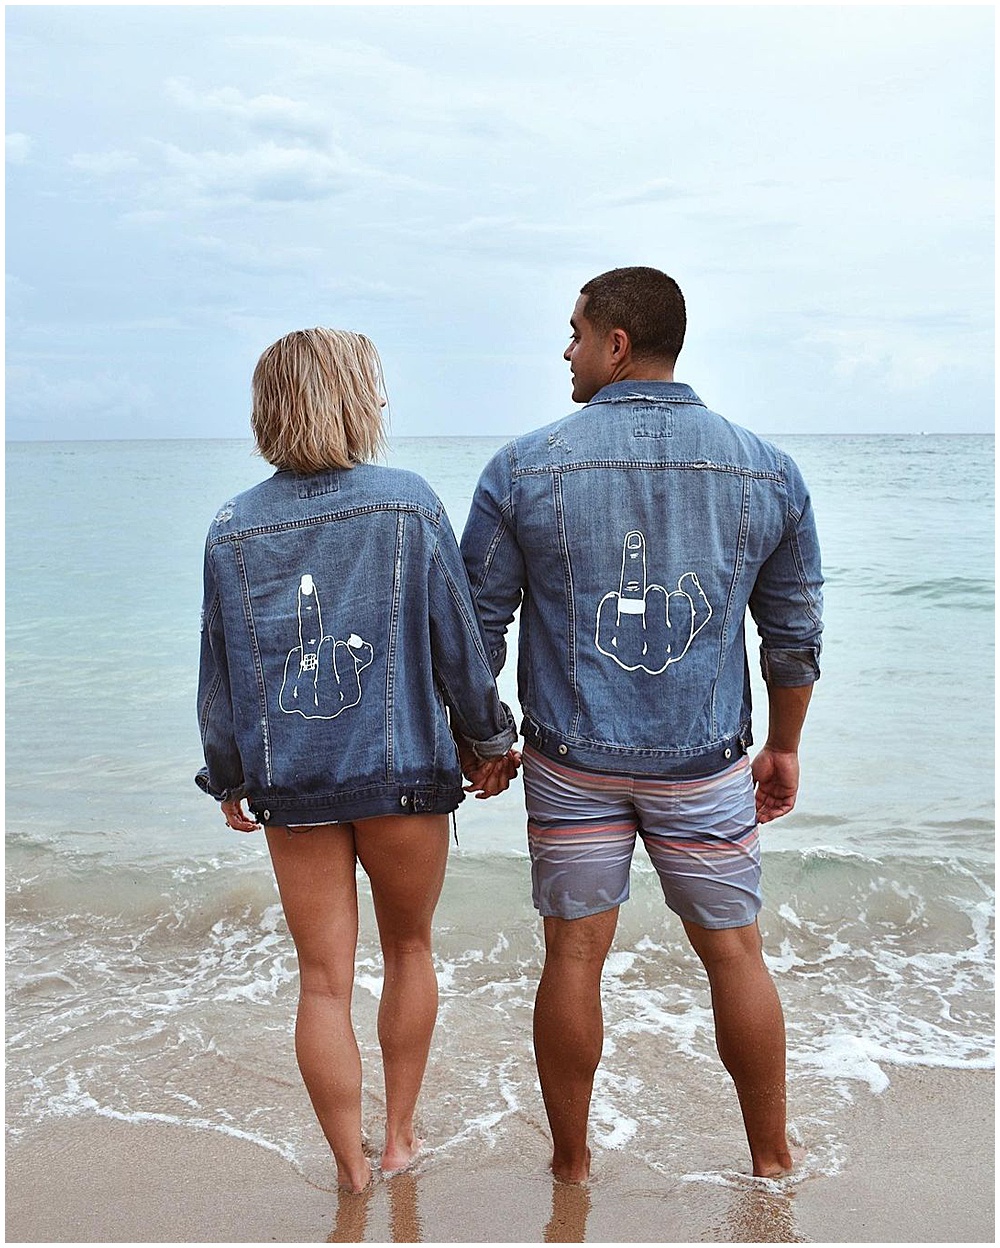 Matching His and Hers Outfits | Perfect Palm Beach Themed Gifts | West Palm Beach Gift Ideas | Palm Beach, FL | Married in Palm Beach | www.marriedinpalmbeach.com | Hubs and Hers